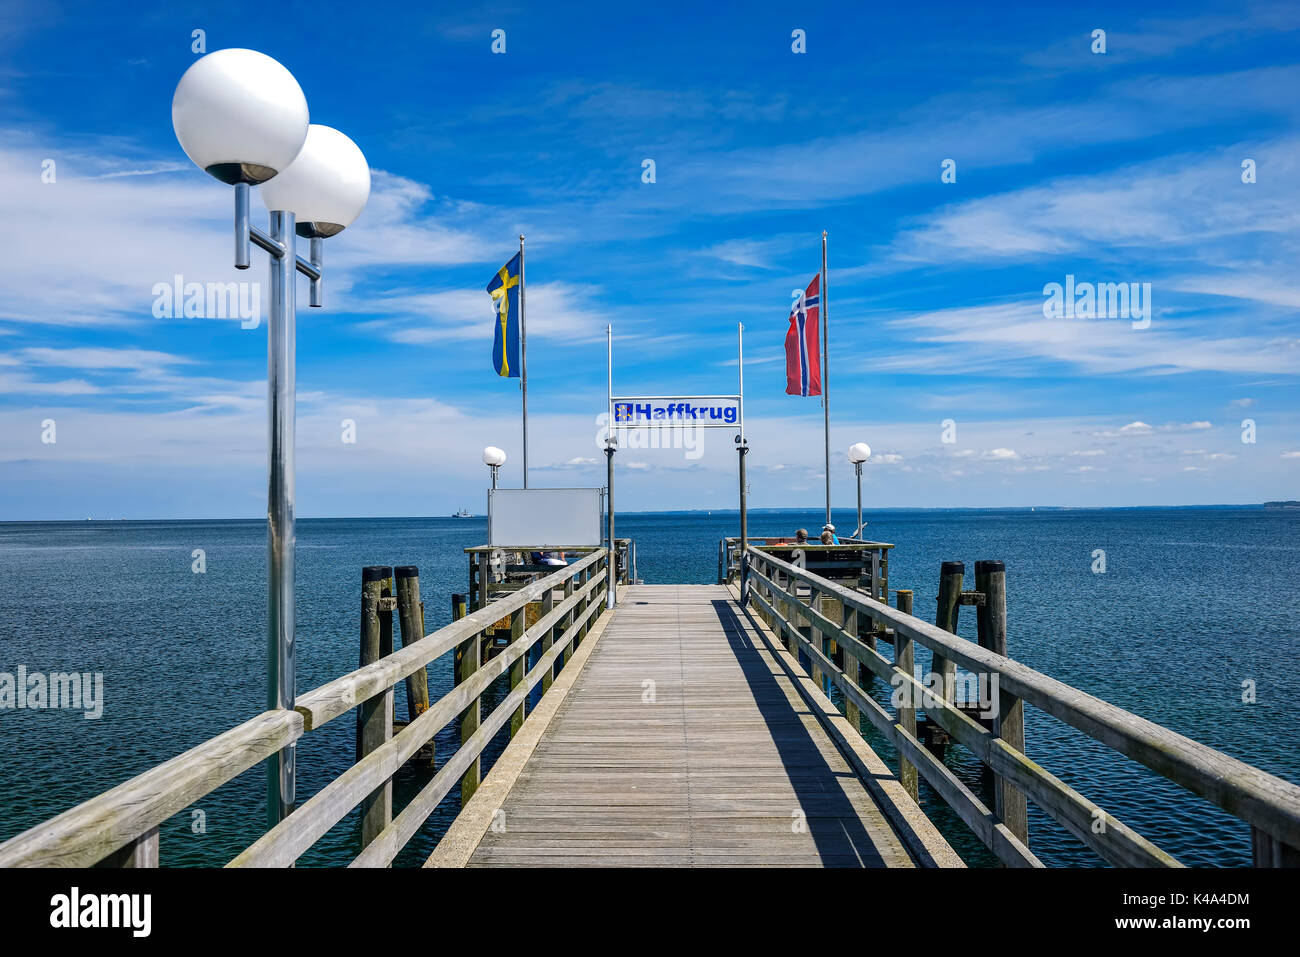 Pier And Baltic Sea In Haffkrug, Germany Stock Photo